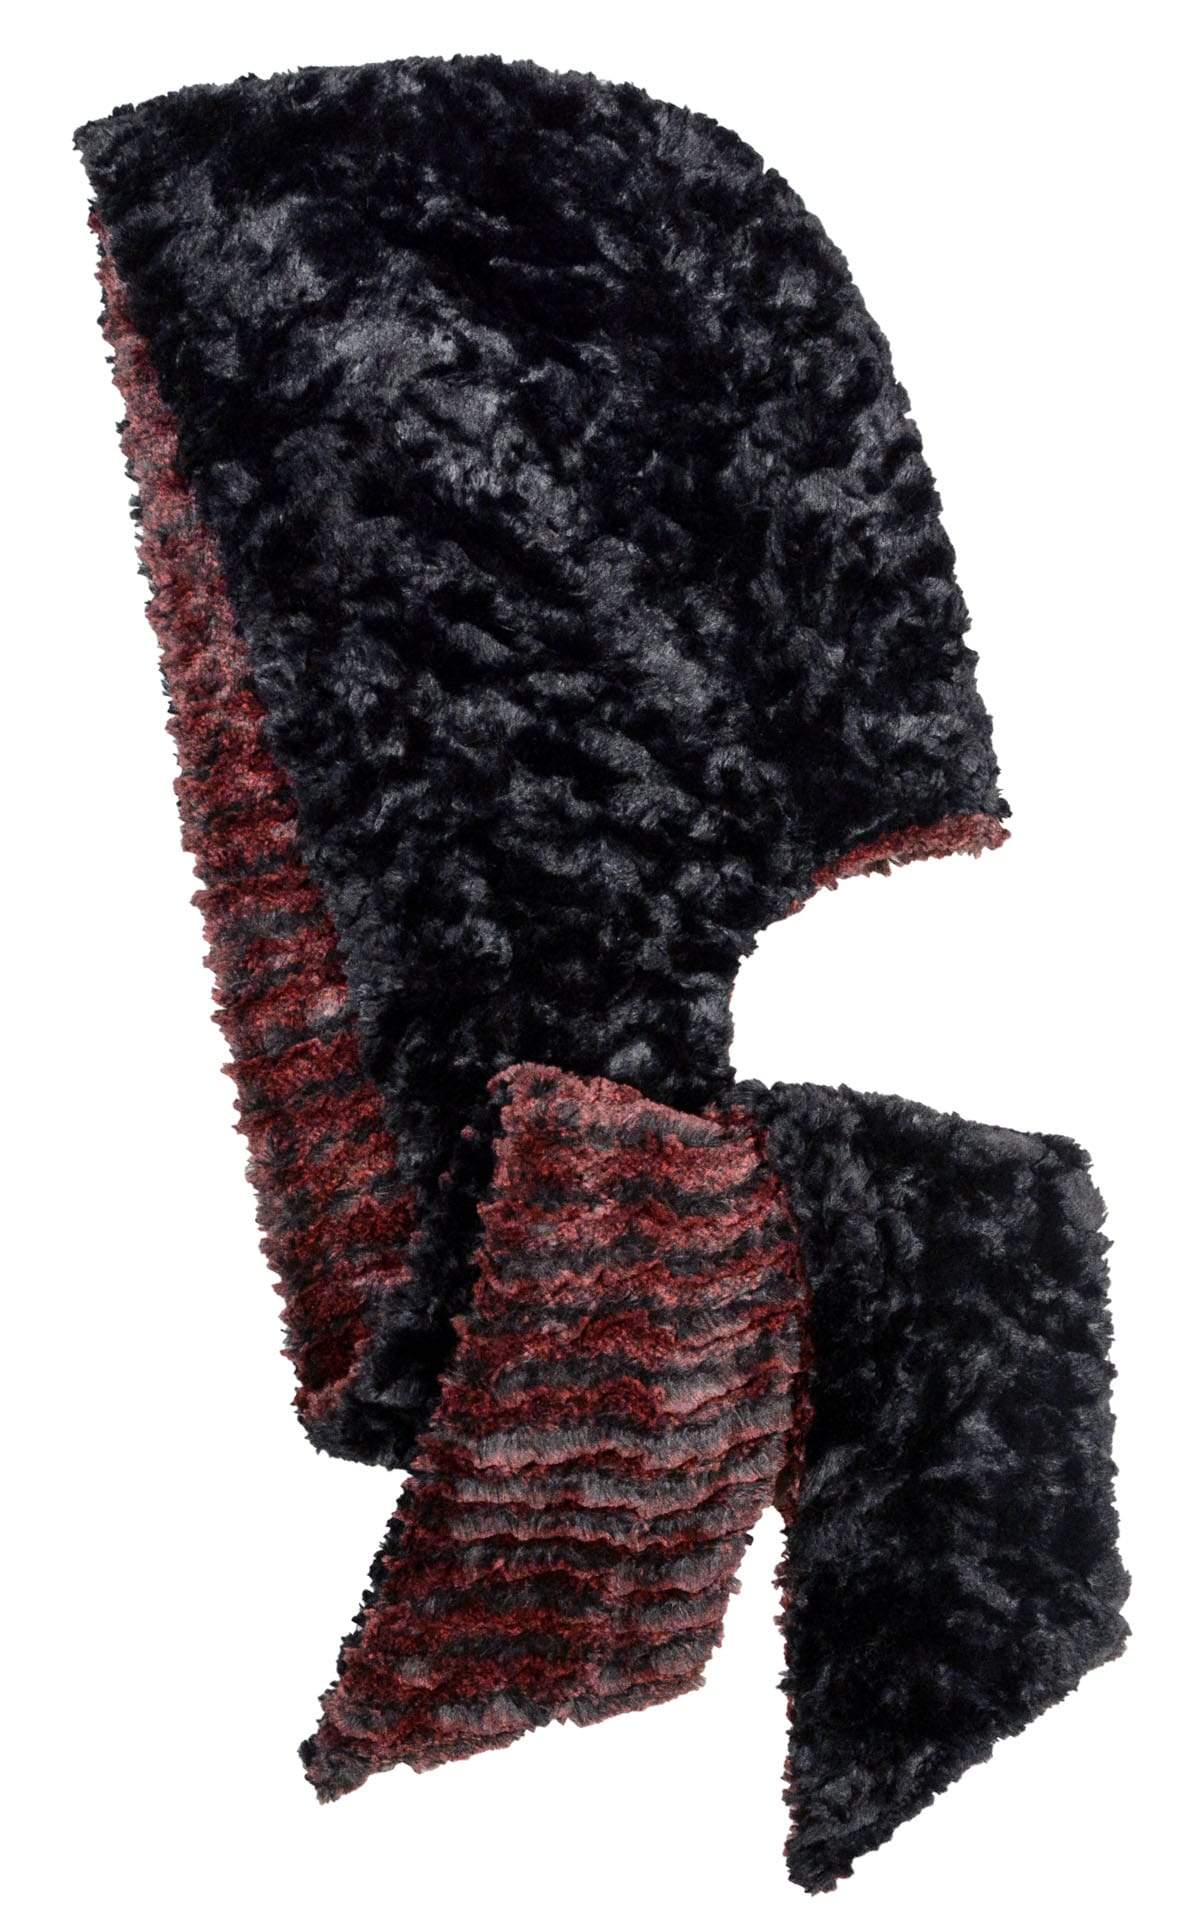 Product shot of Women’s reversible Scarf with hood | Desert sand in crimson (red) with cuddly black Faux Fur, shown in reverse | Handmade in Seattle WA | Pandemonium Millinery